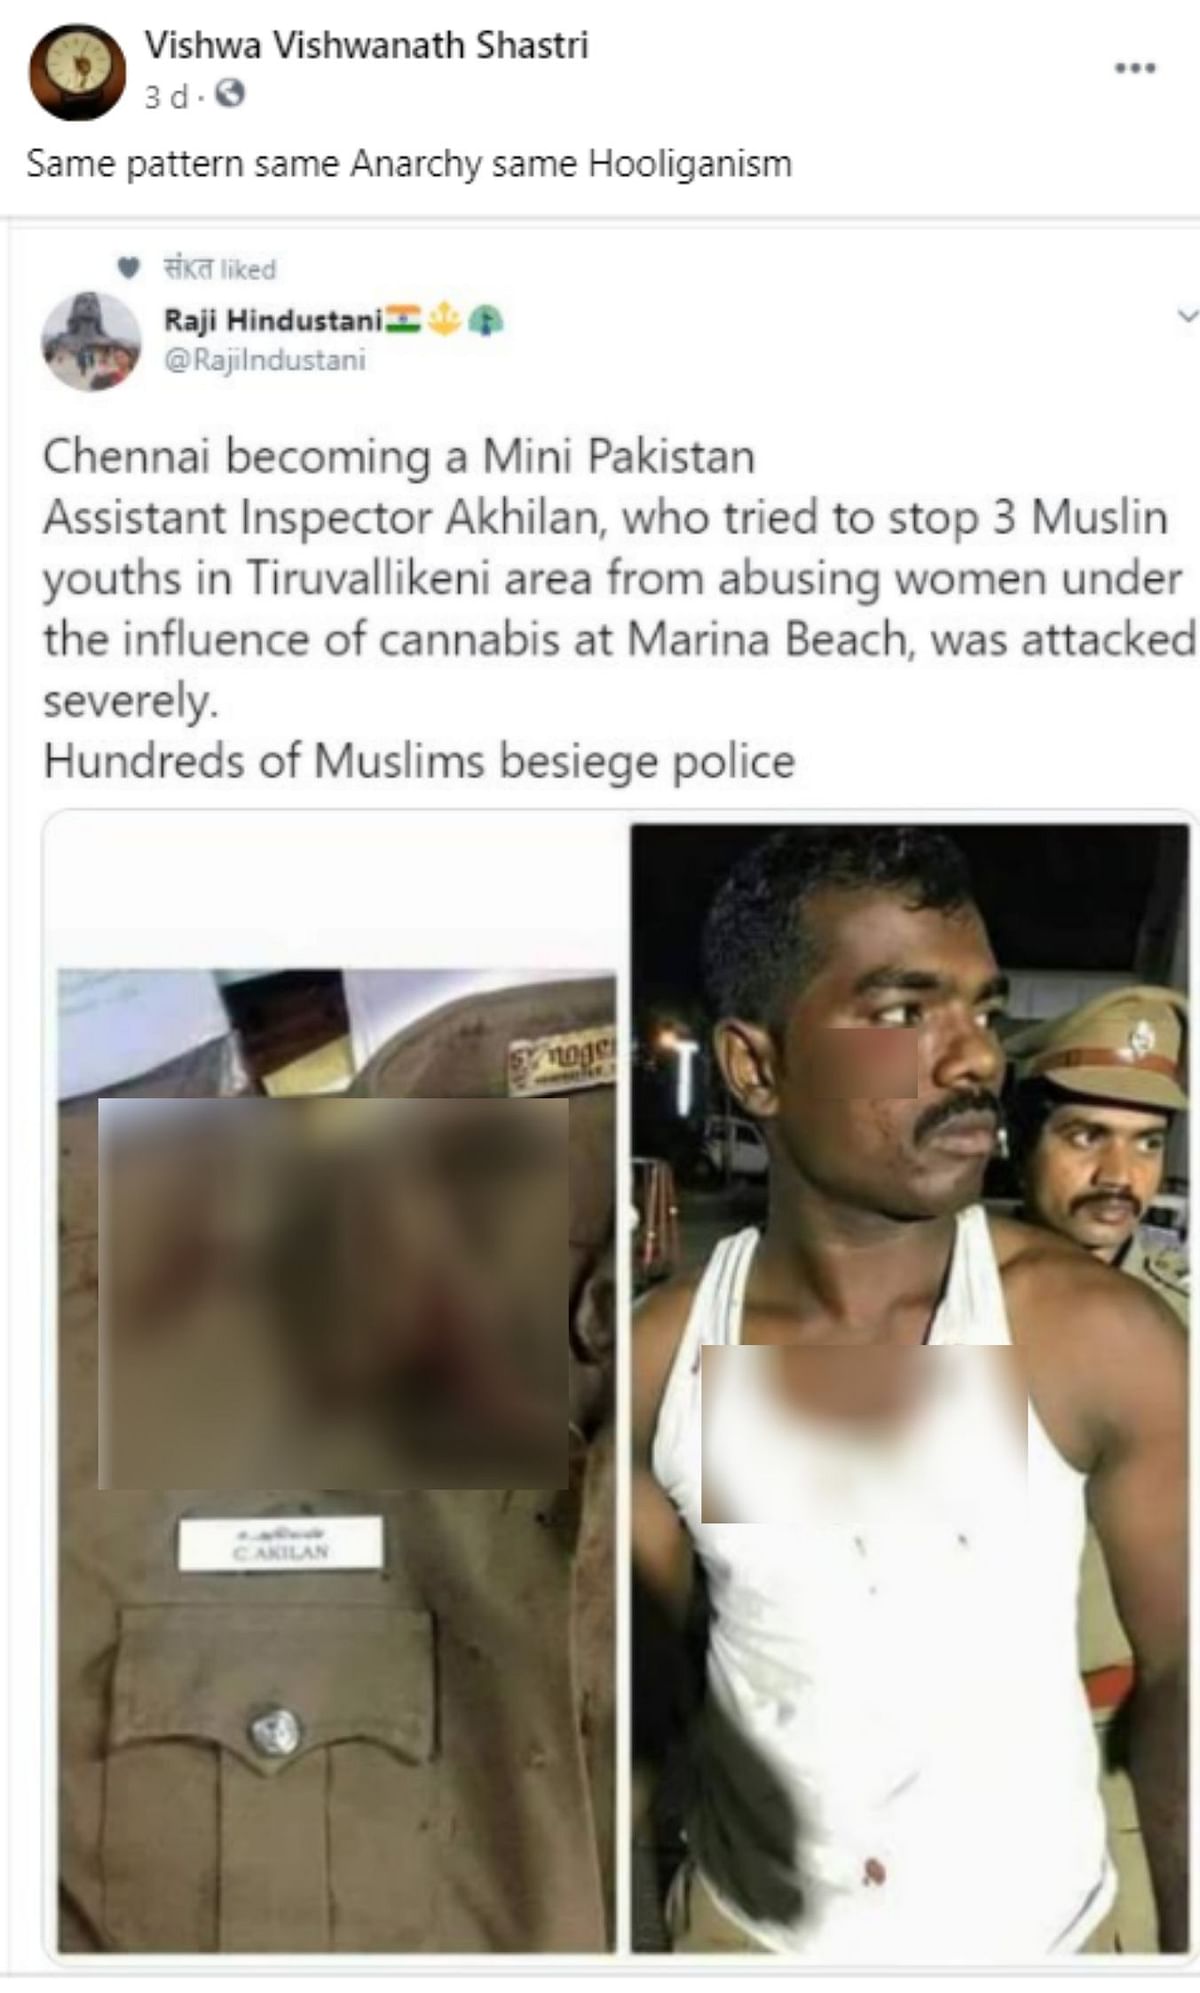 The incident took place in 2017 and has resurfaced with a false communal spin. The attackers were actually Hindu.